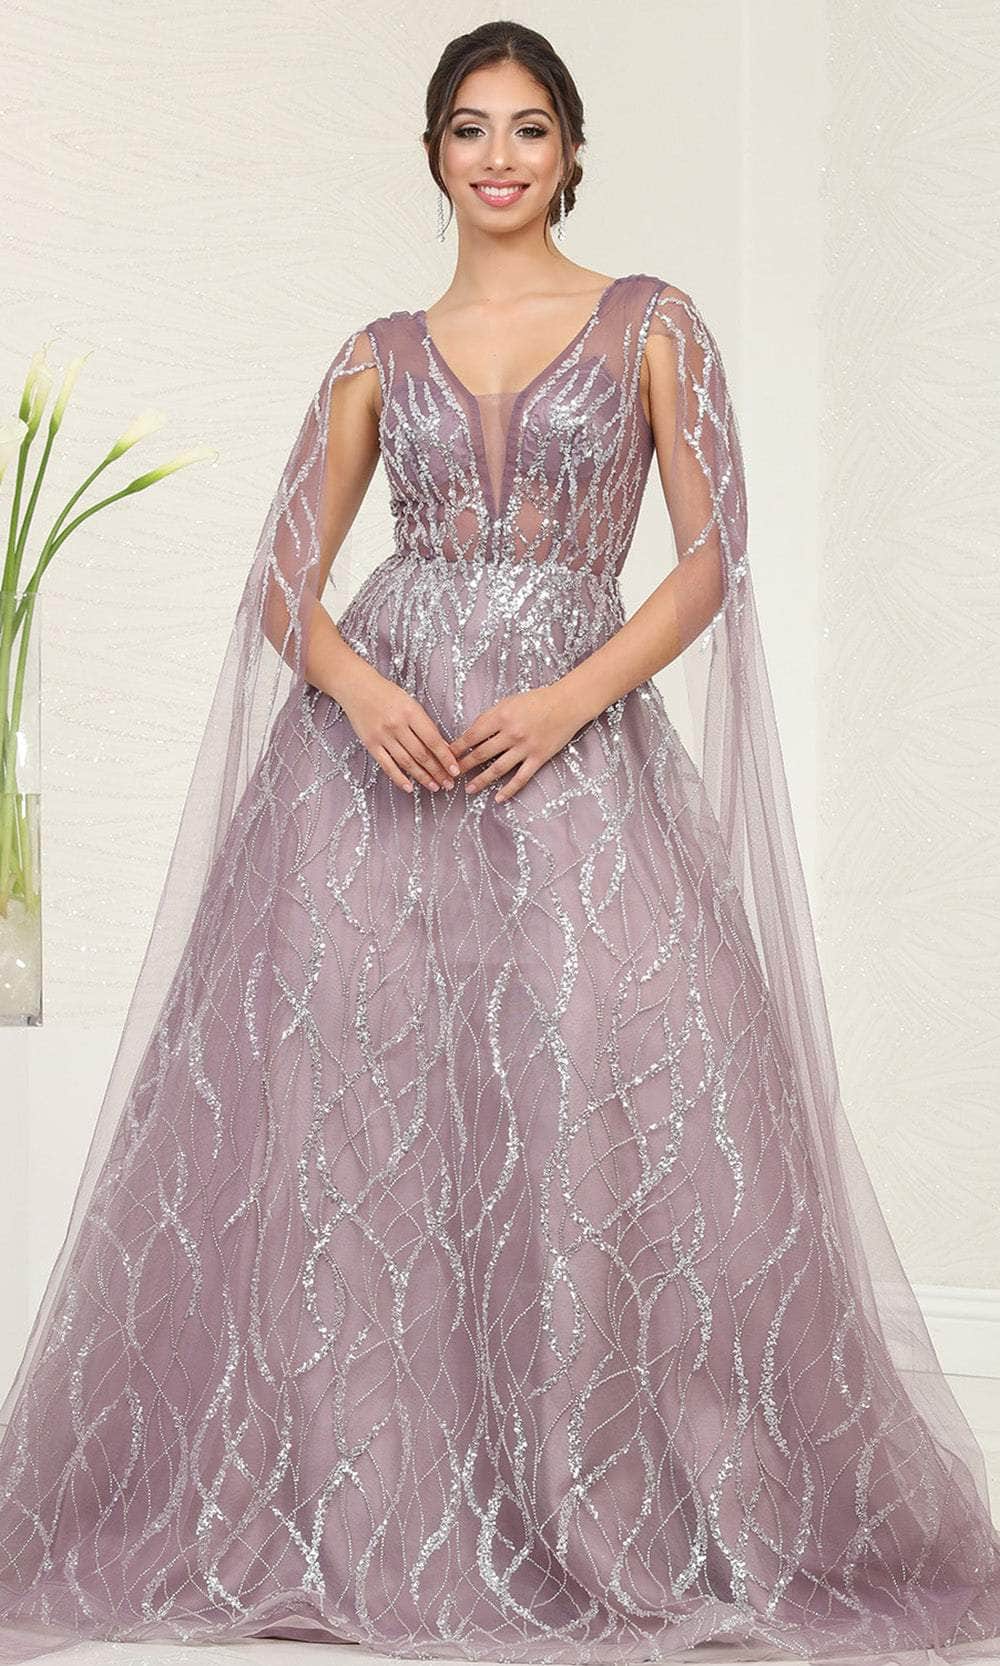 May Queen RQ8082 - Cape Sleeve Beaded Prom Gown
